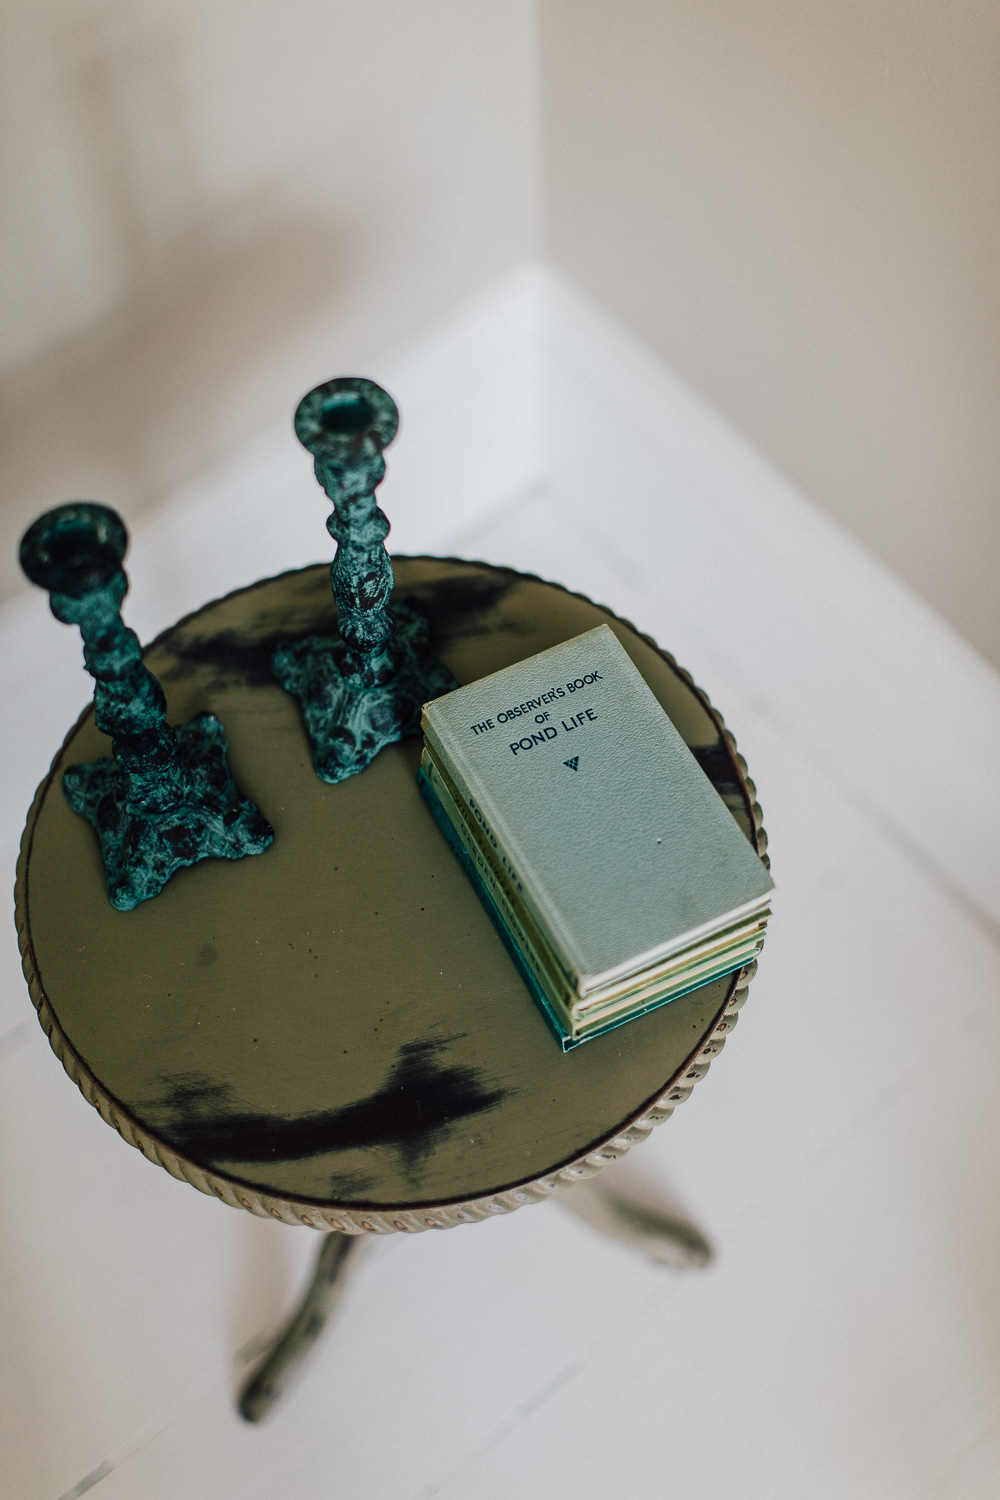 Candle sticks and vintage book